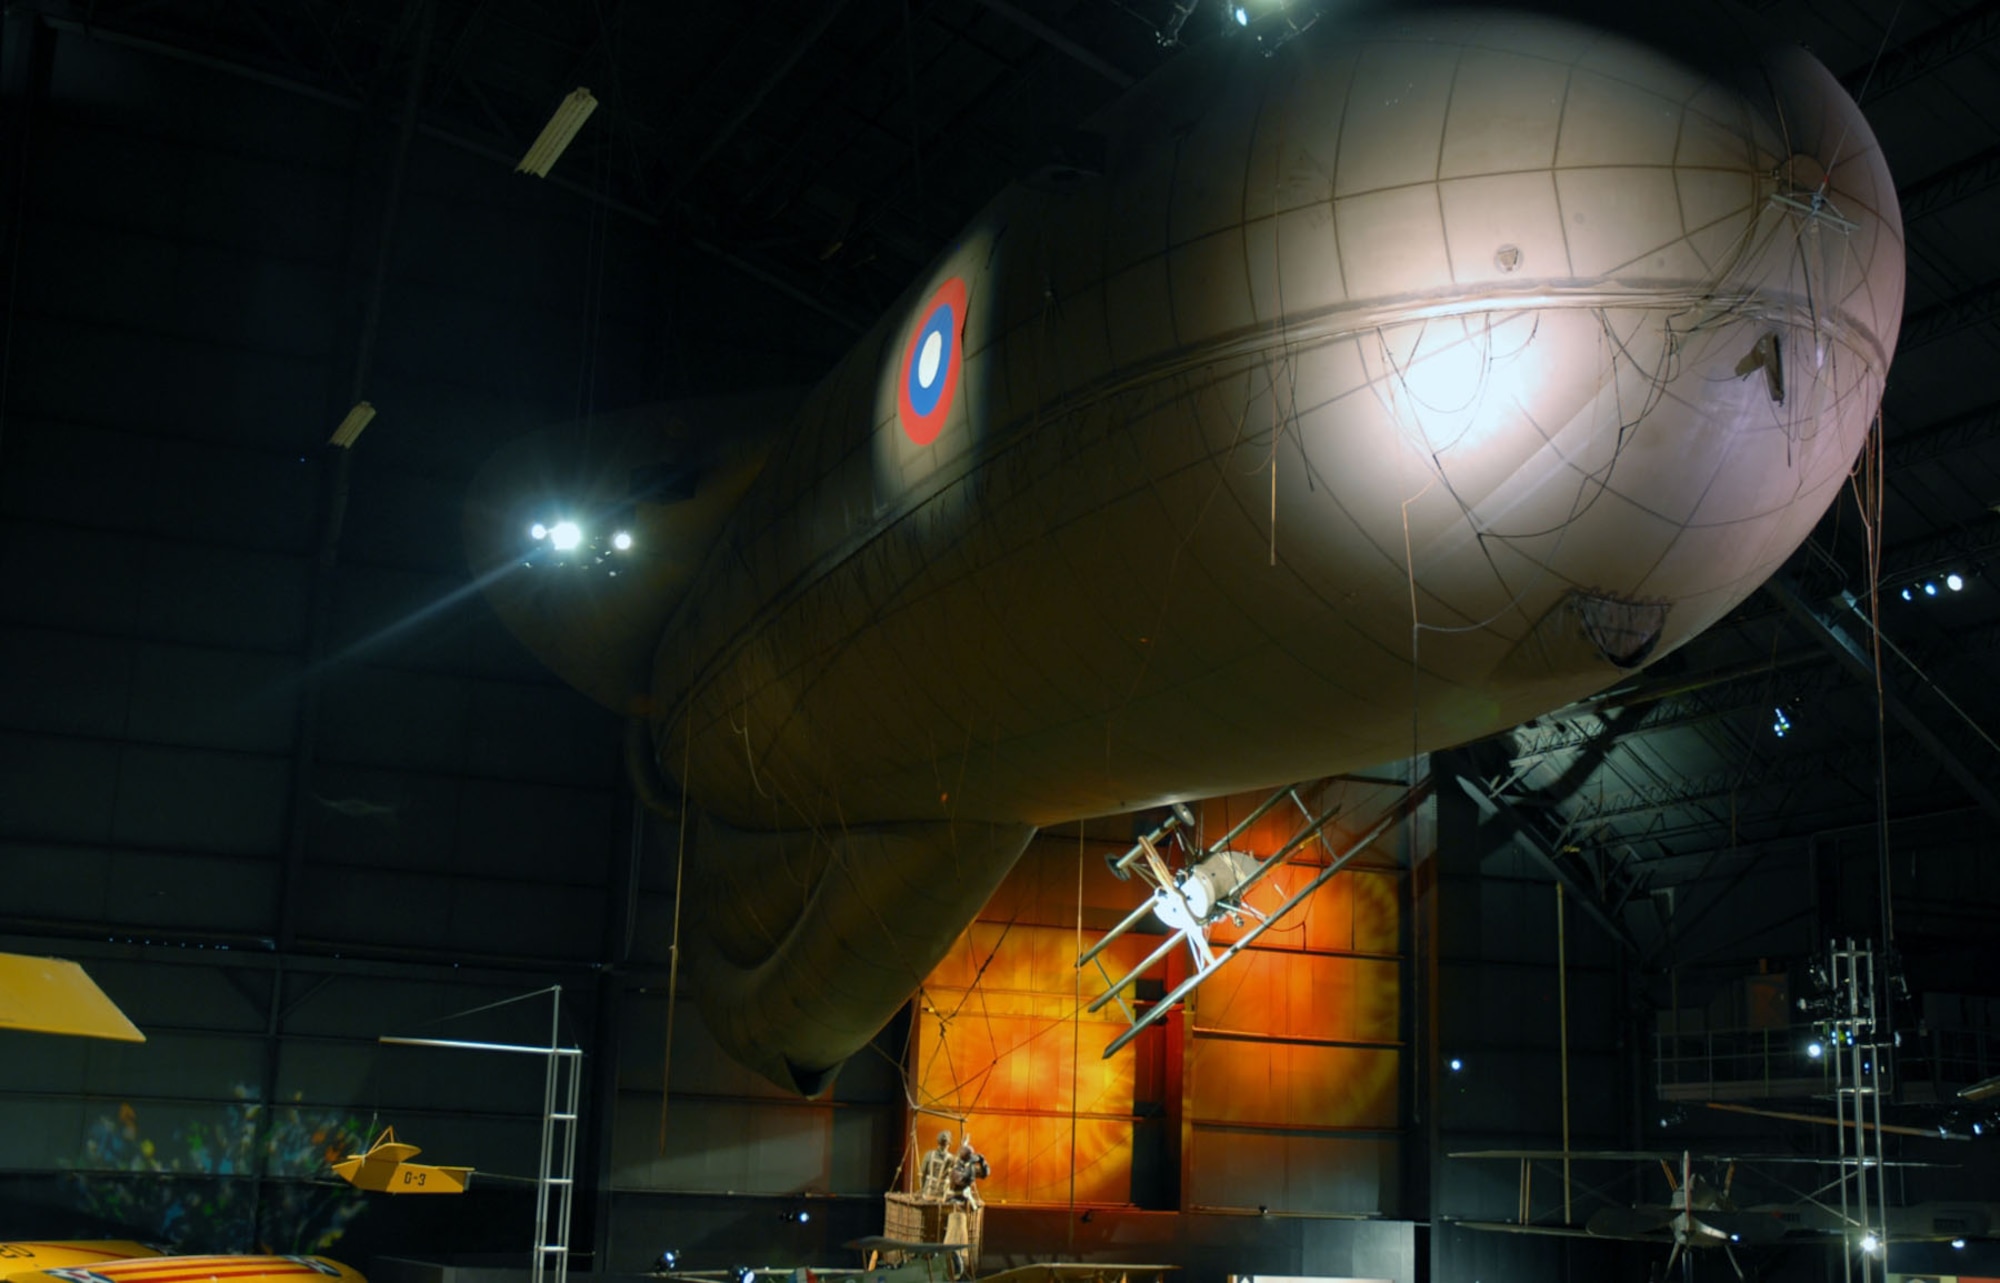 DAYTON, Ohio -- Caquot Type R Observation Balloon in the Early Years Gallery at the National Museum of the United States Air Force. (U.S. Air Force photo)